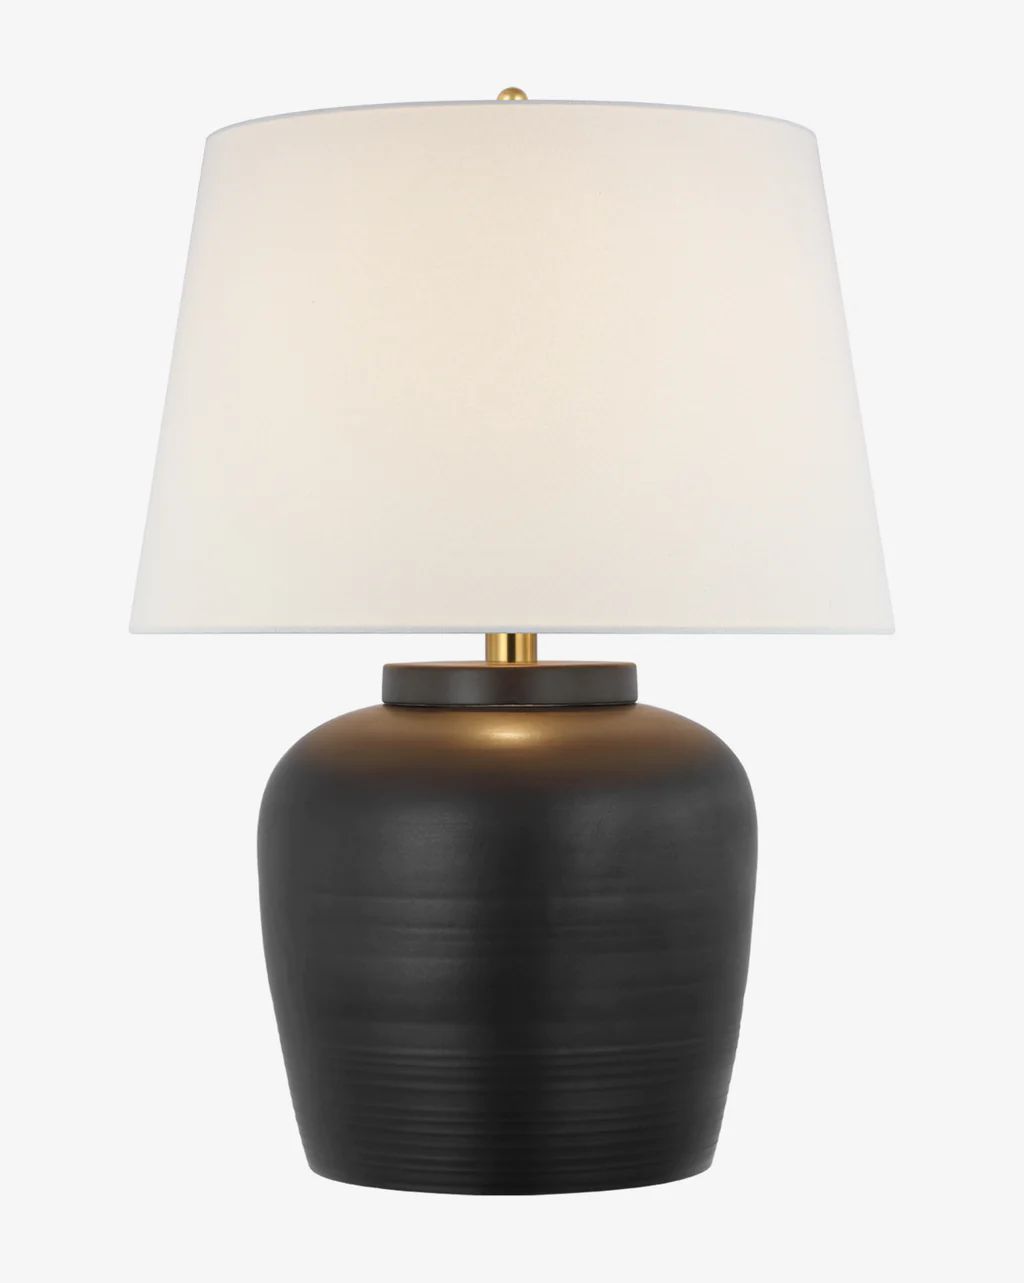 Nora Table Lamp | McGee & Co.